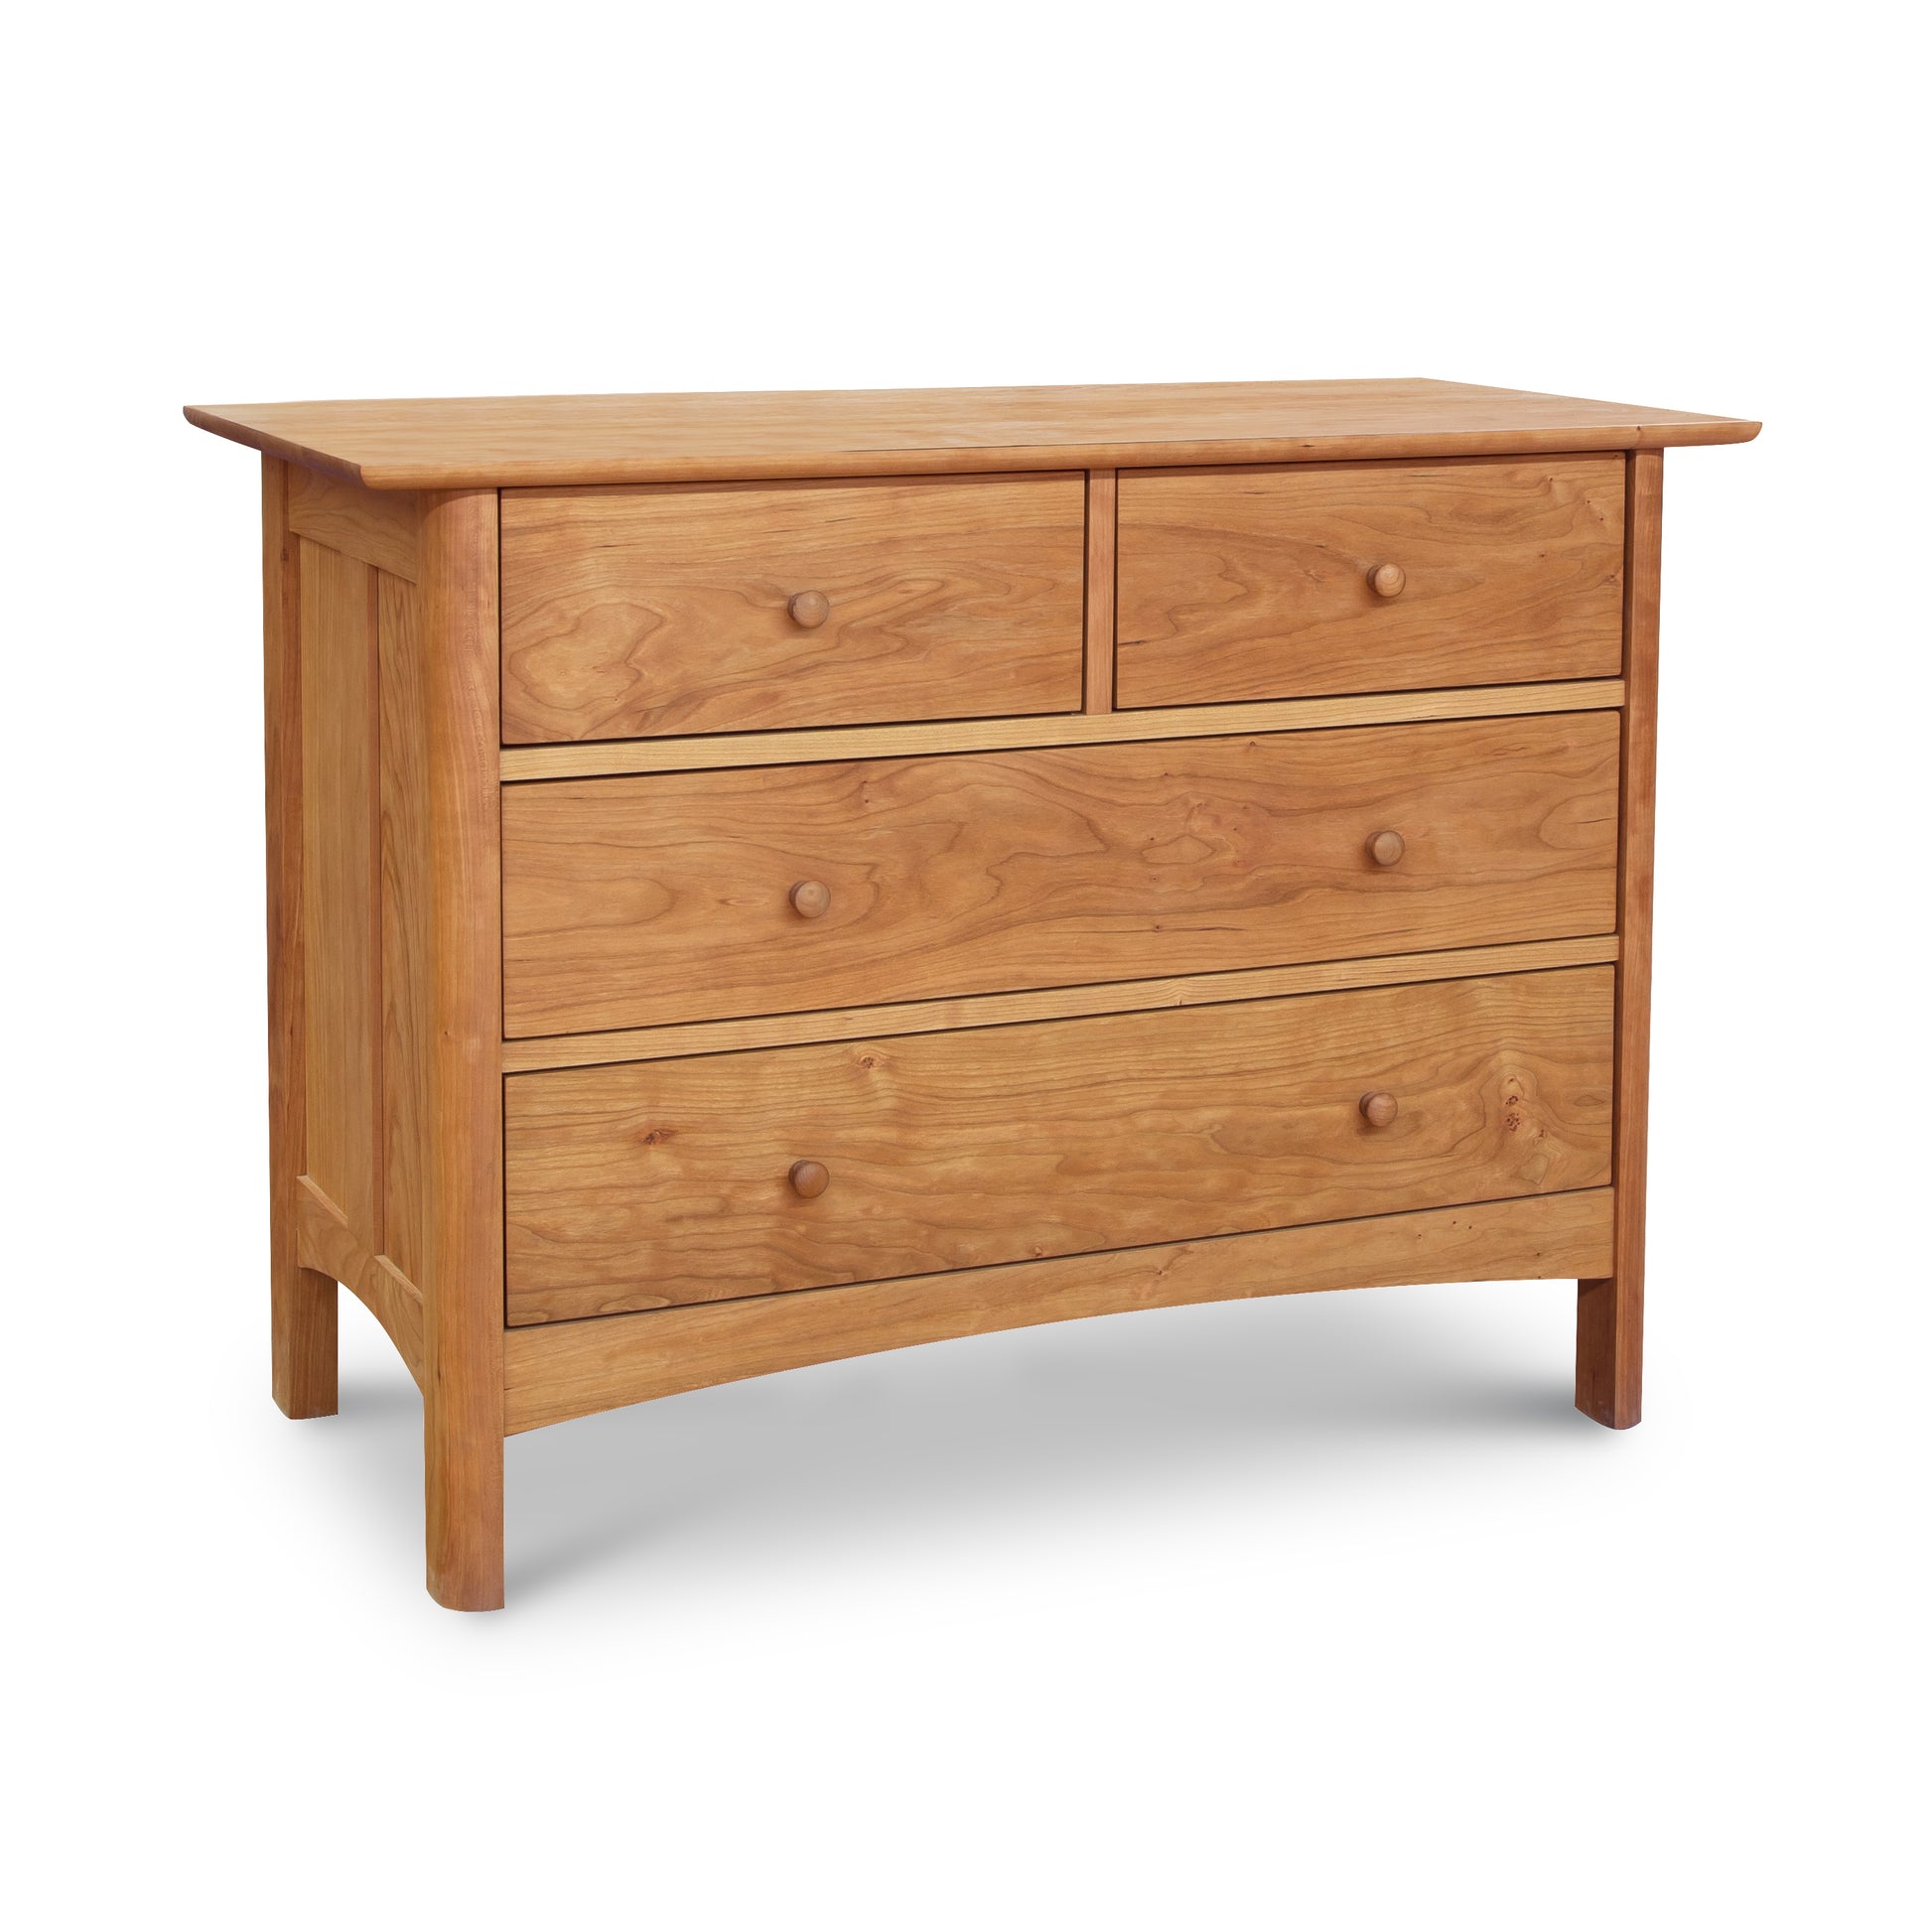 A Vermont Furniture Designs Heartwood Shaker 4-Drawer Dresser on a white background.